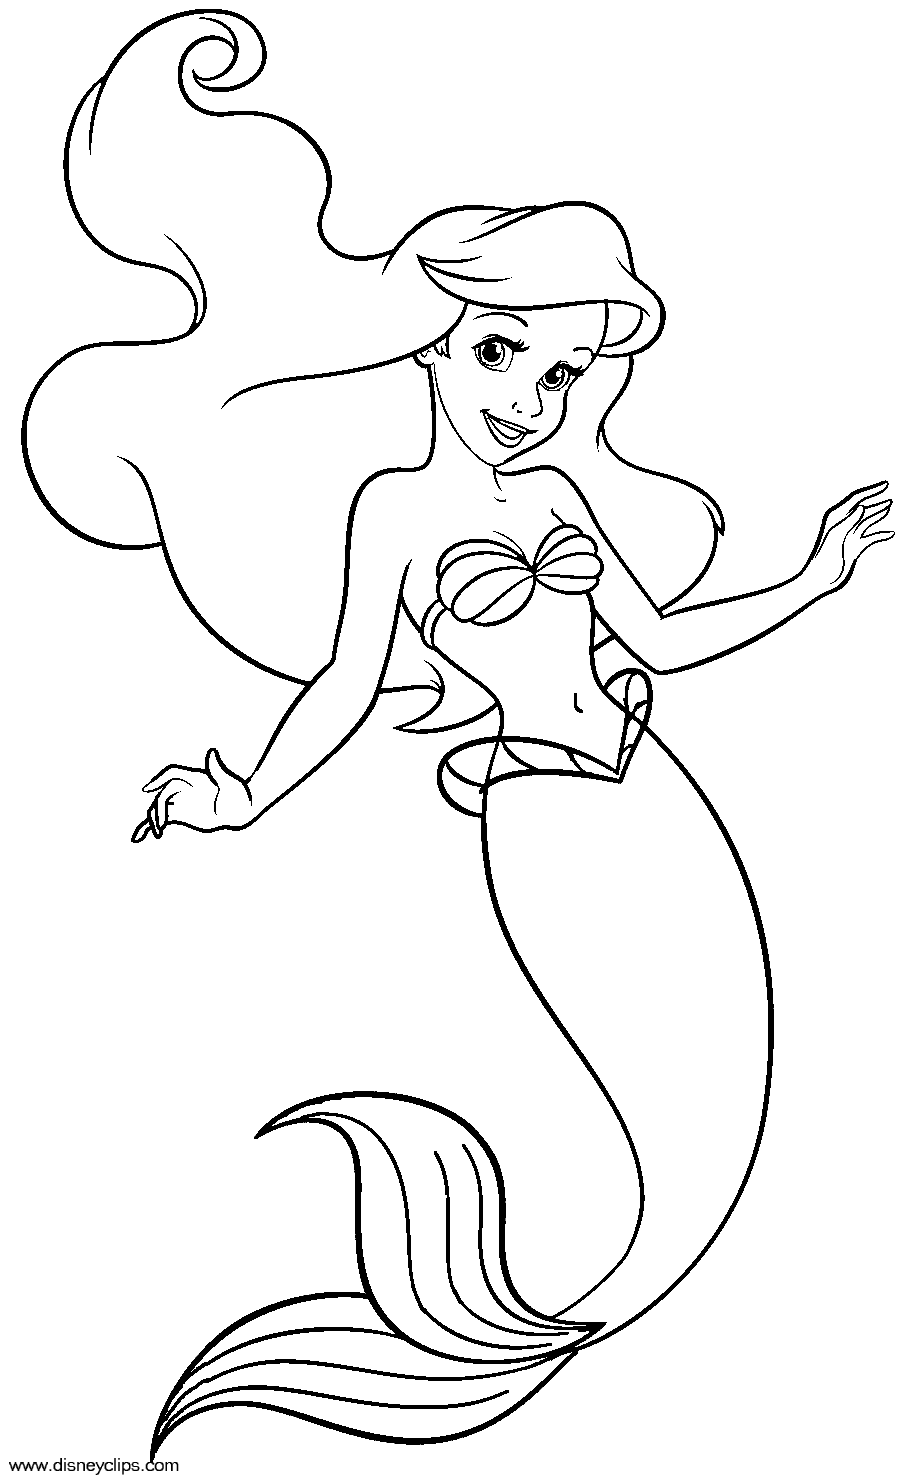 printable ariel coloring pages the little mermaid coloring pages to download and print ariel coloring pages printable 